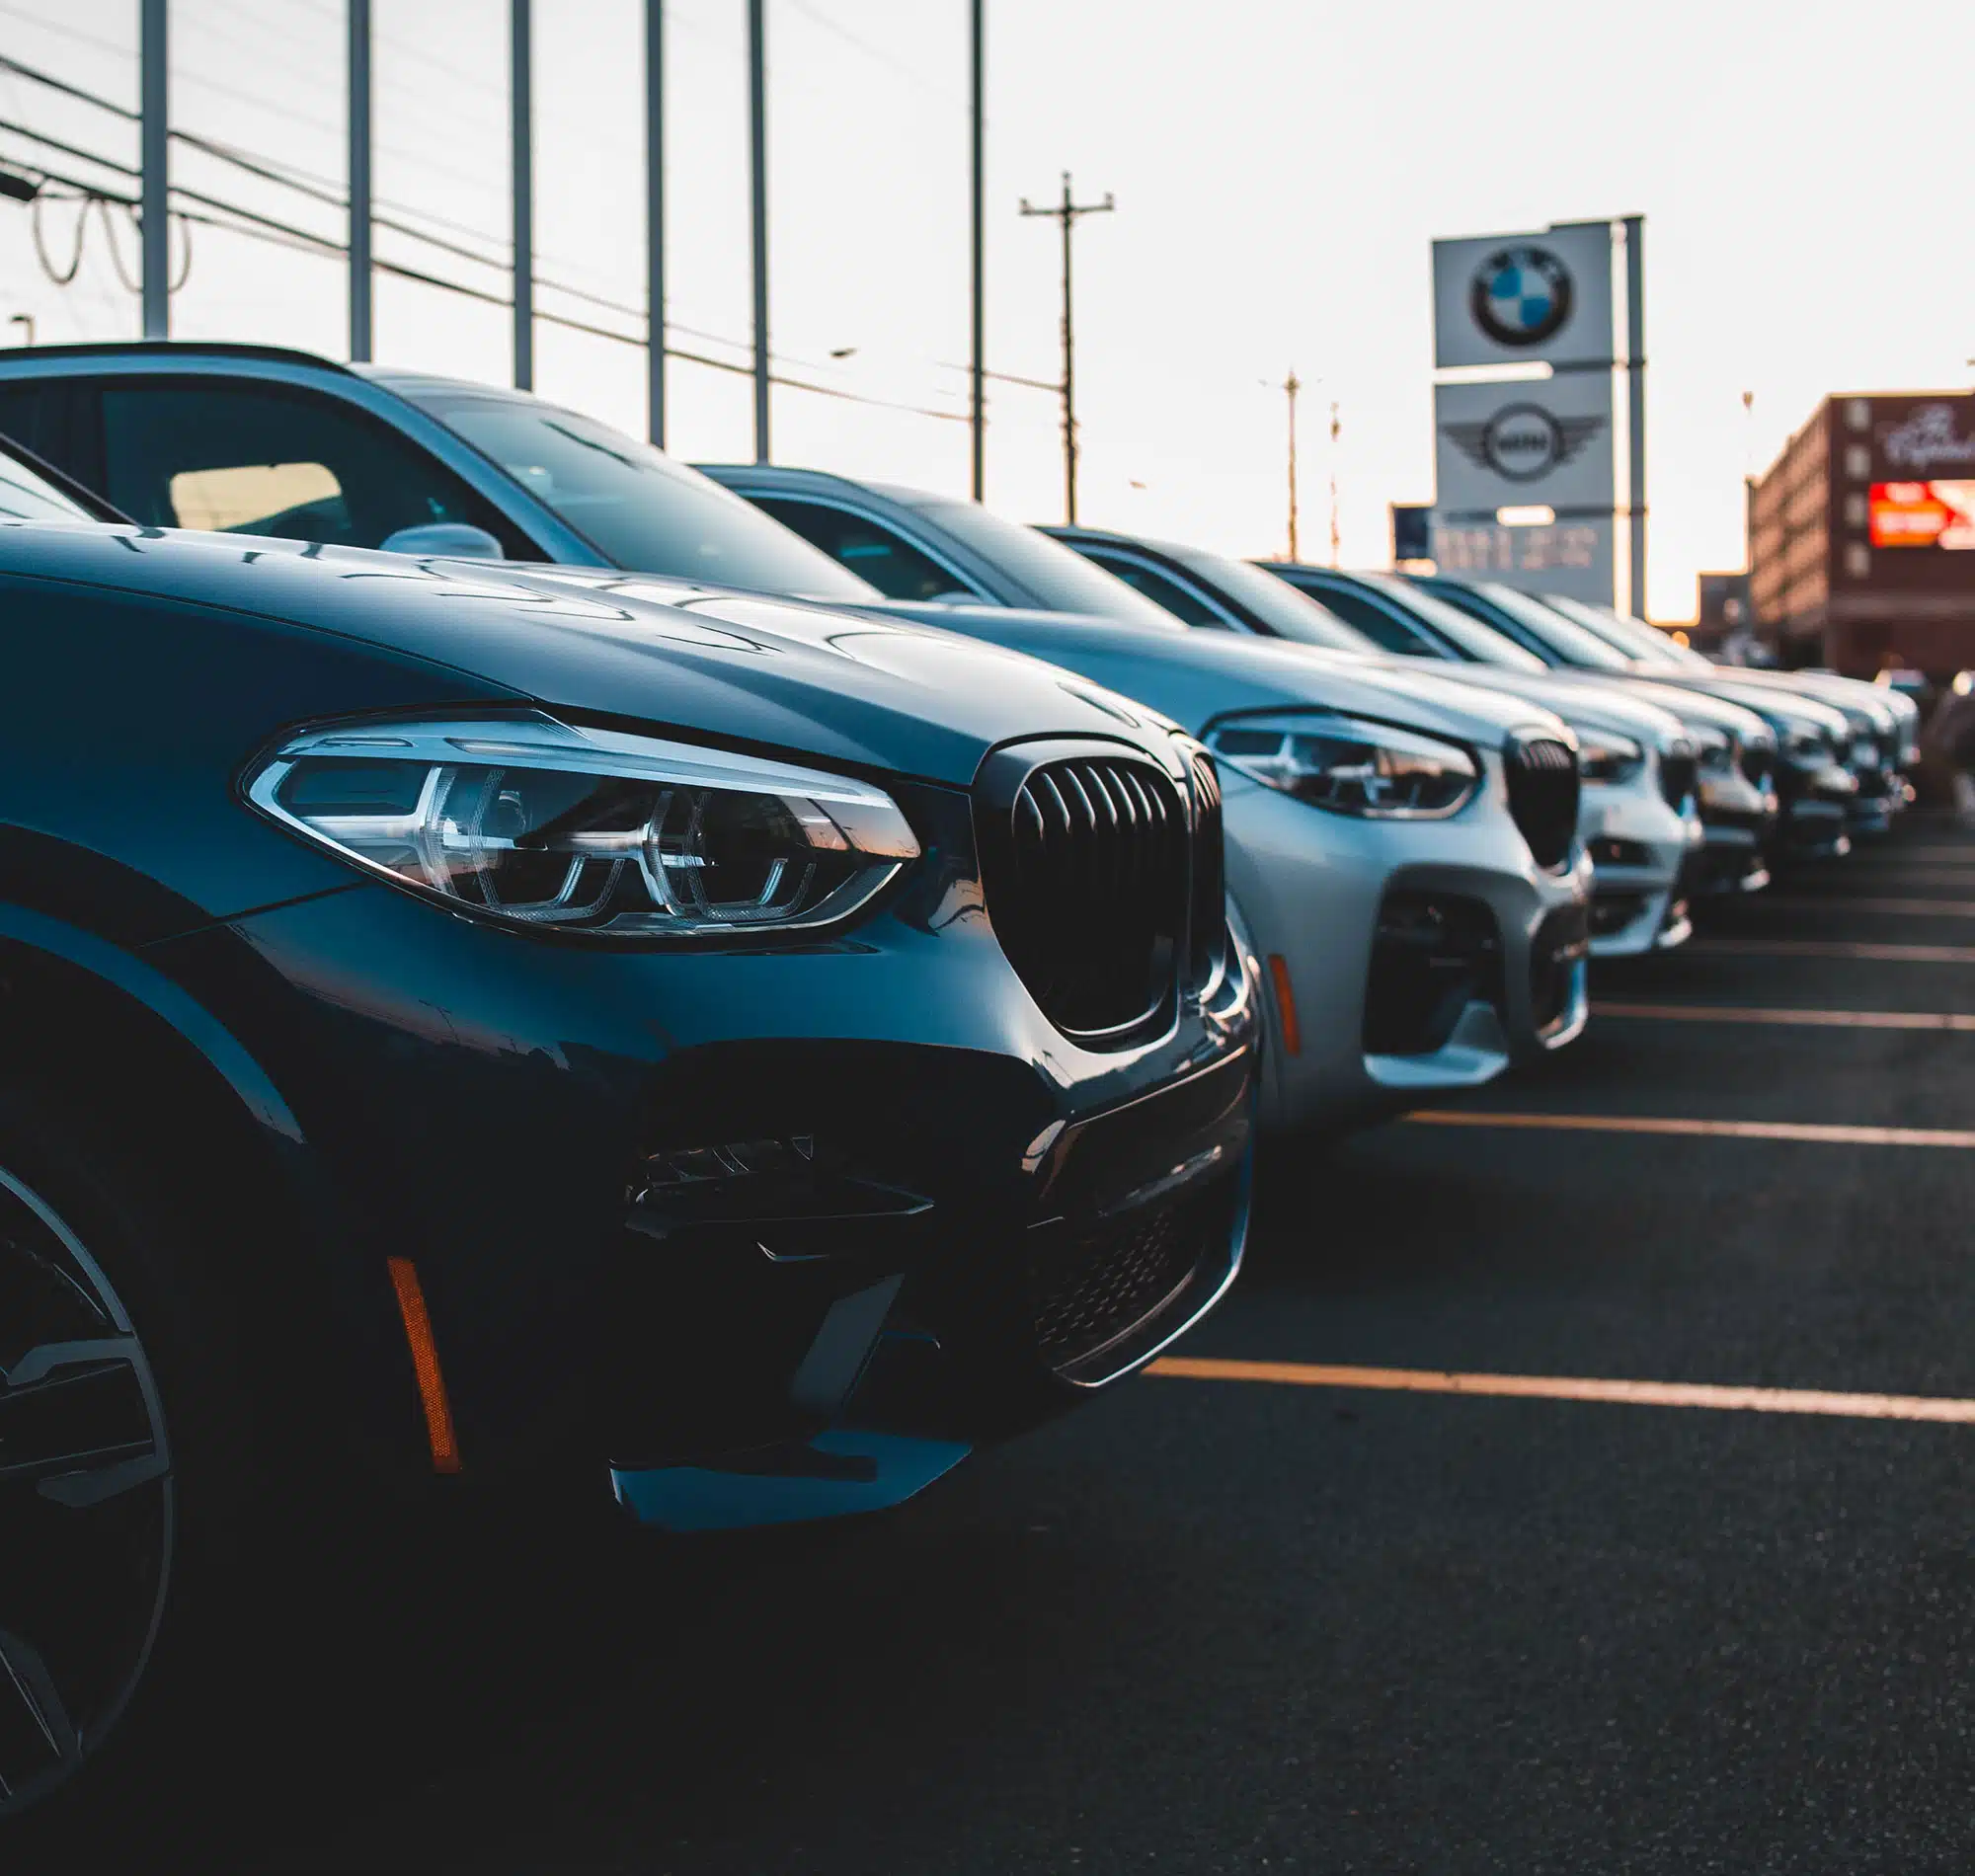 A row of BMW cars at a dealership